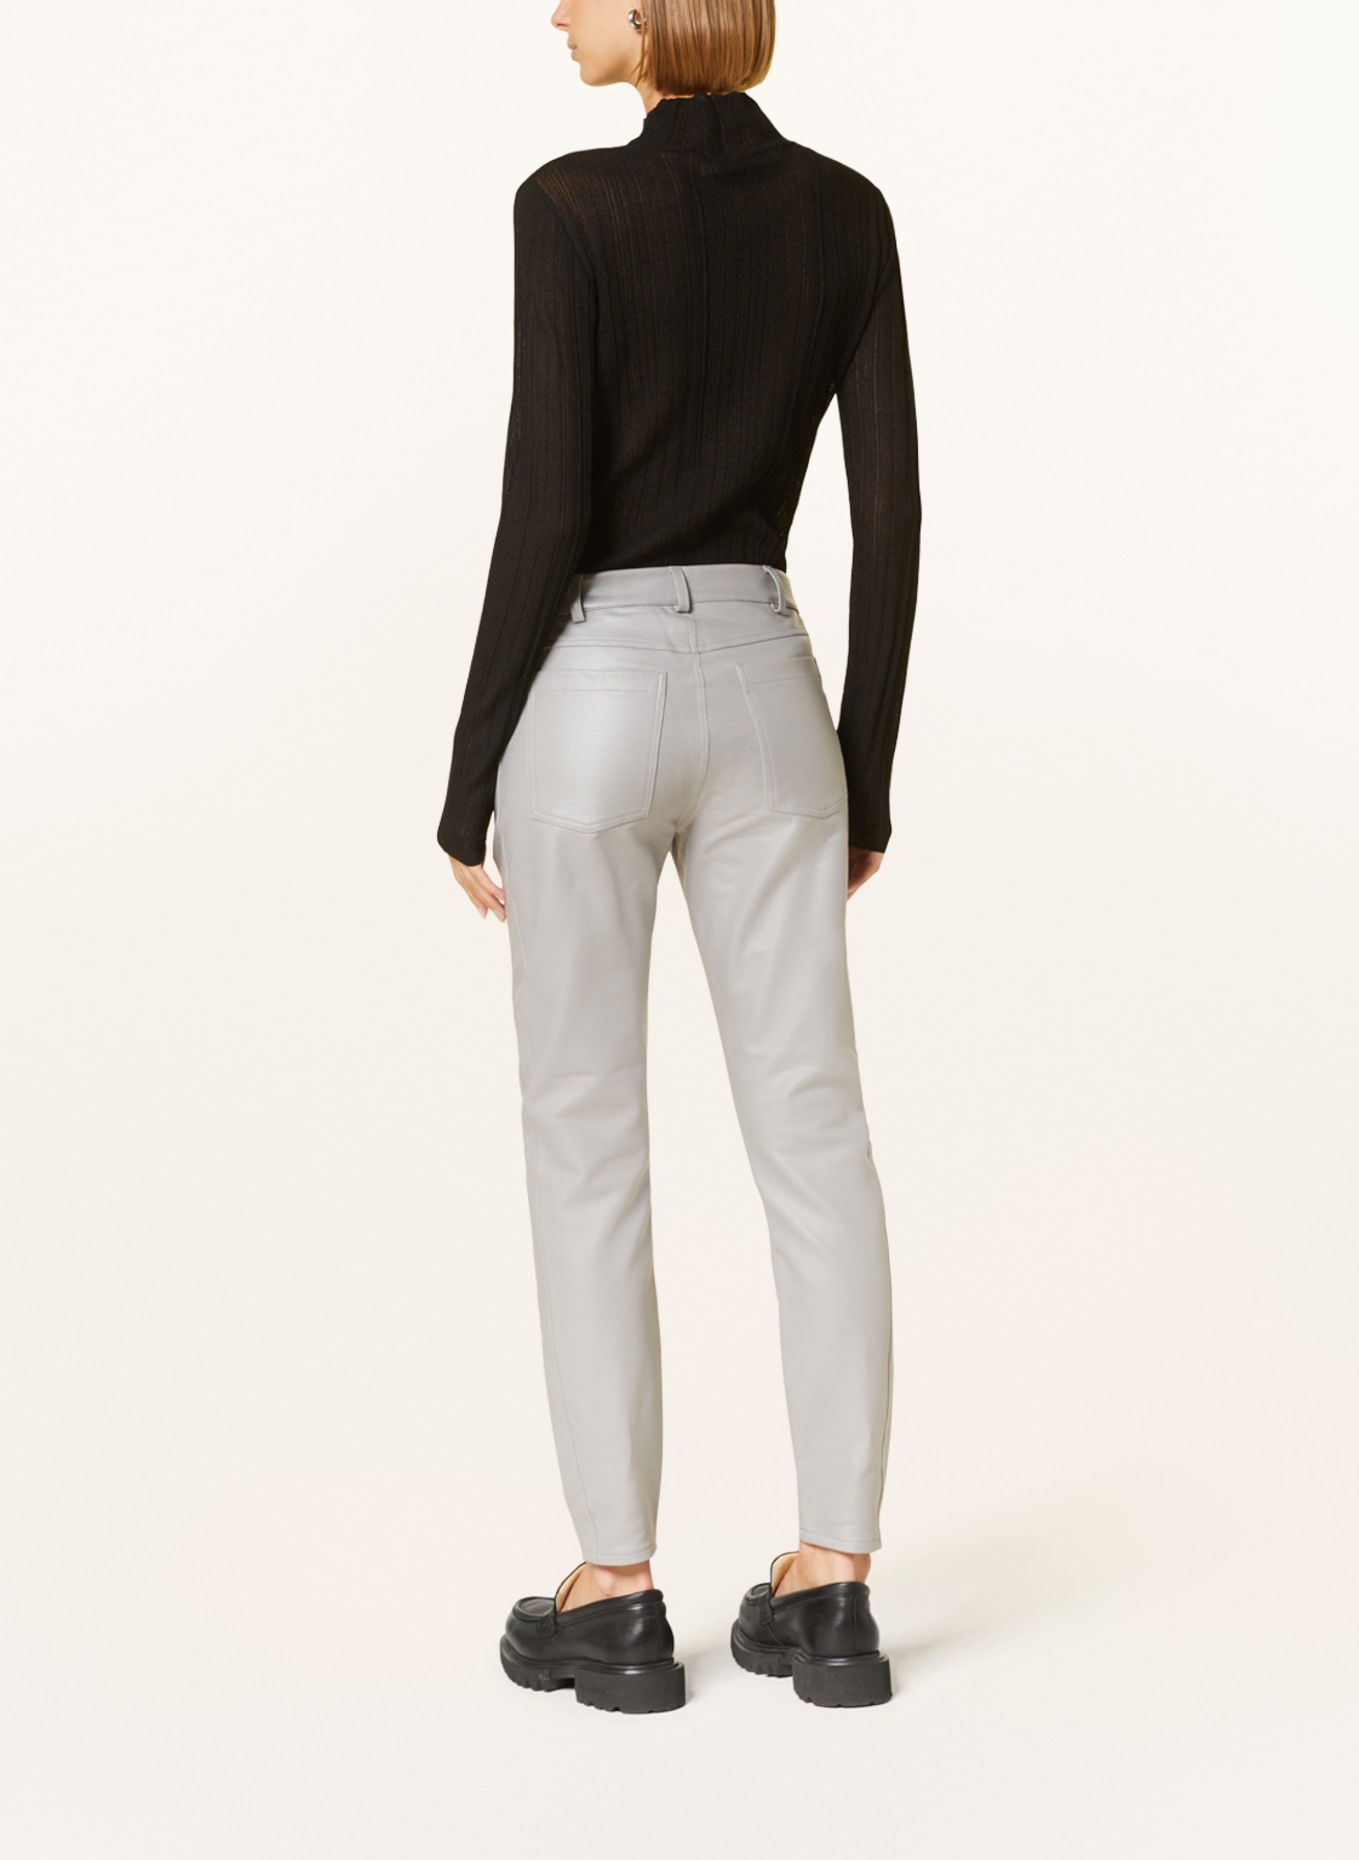 monari Pants in leather look, Color: LIGHT GRAY (Image 3)